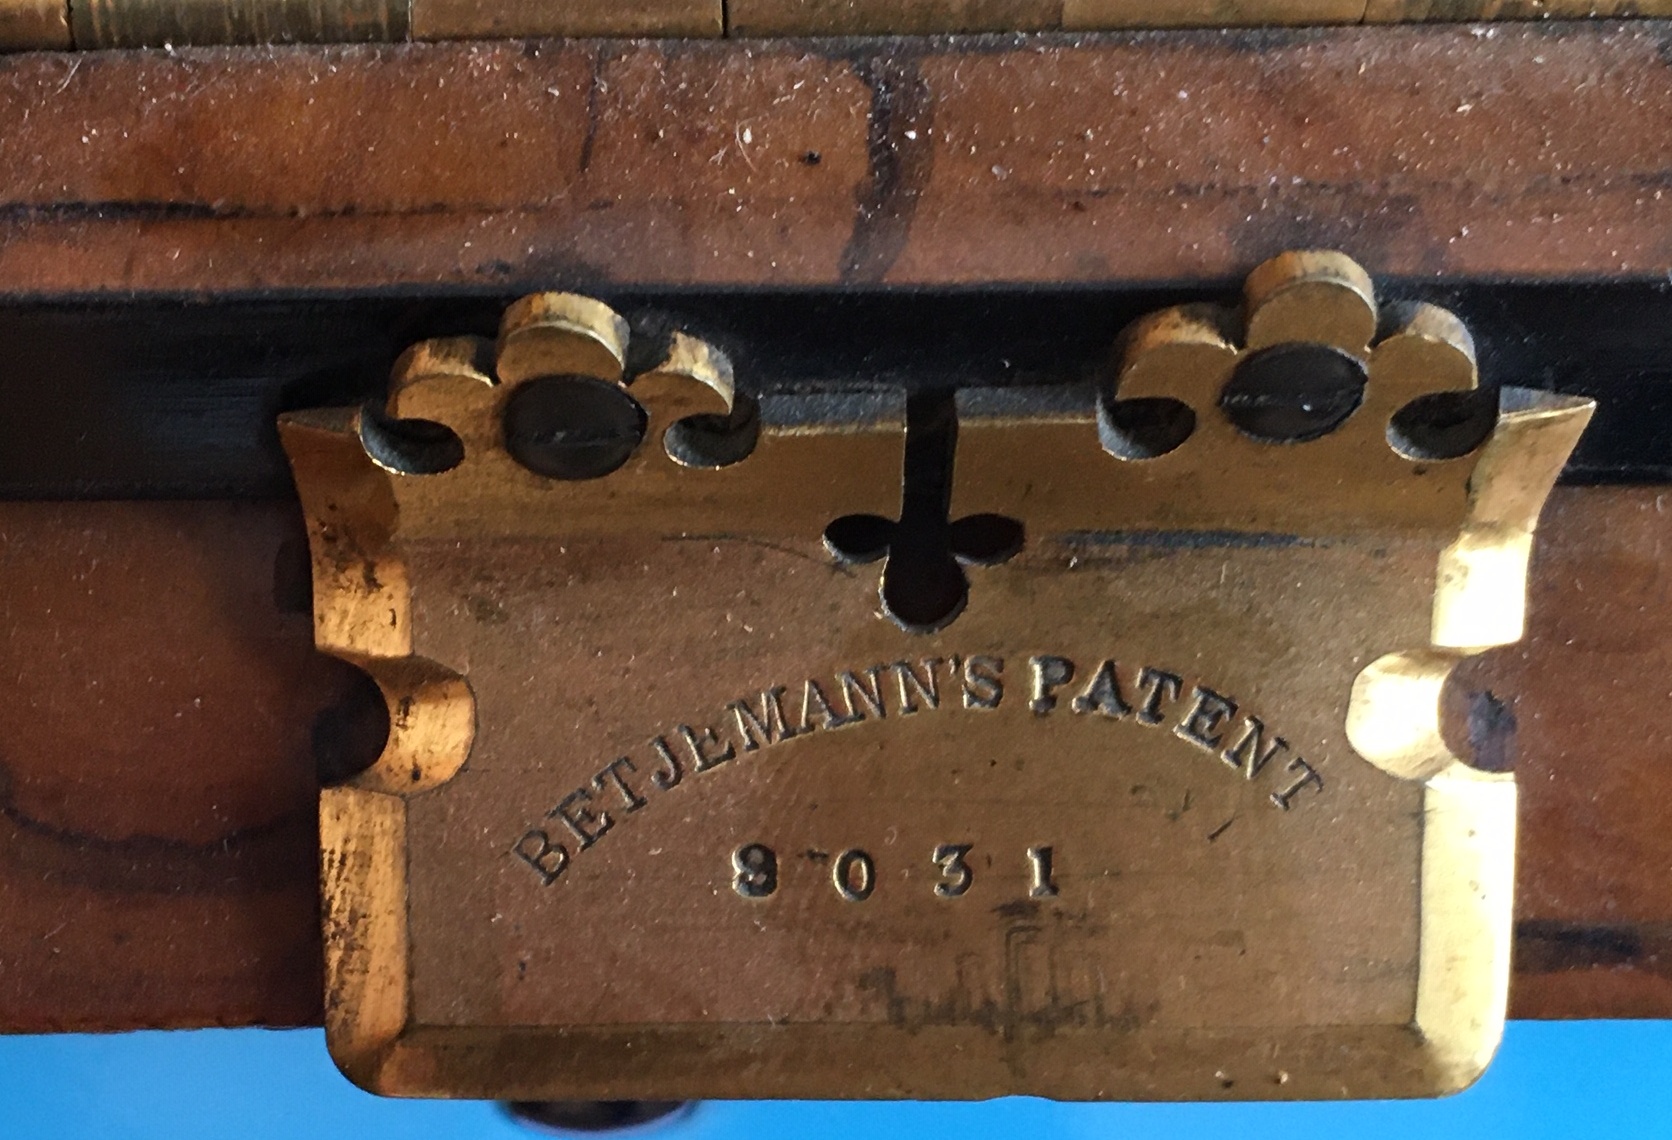 Antique Betjeman's Patent Bookslide inset with Porcelain Plaques - 16" x 7" when closed - 25" open. - Image 3 of 8